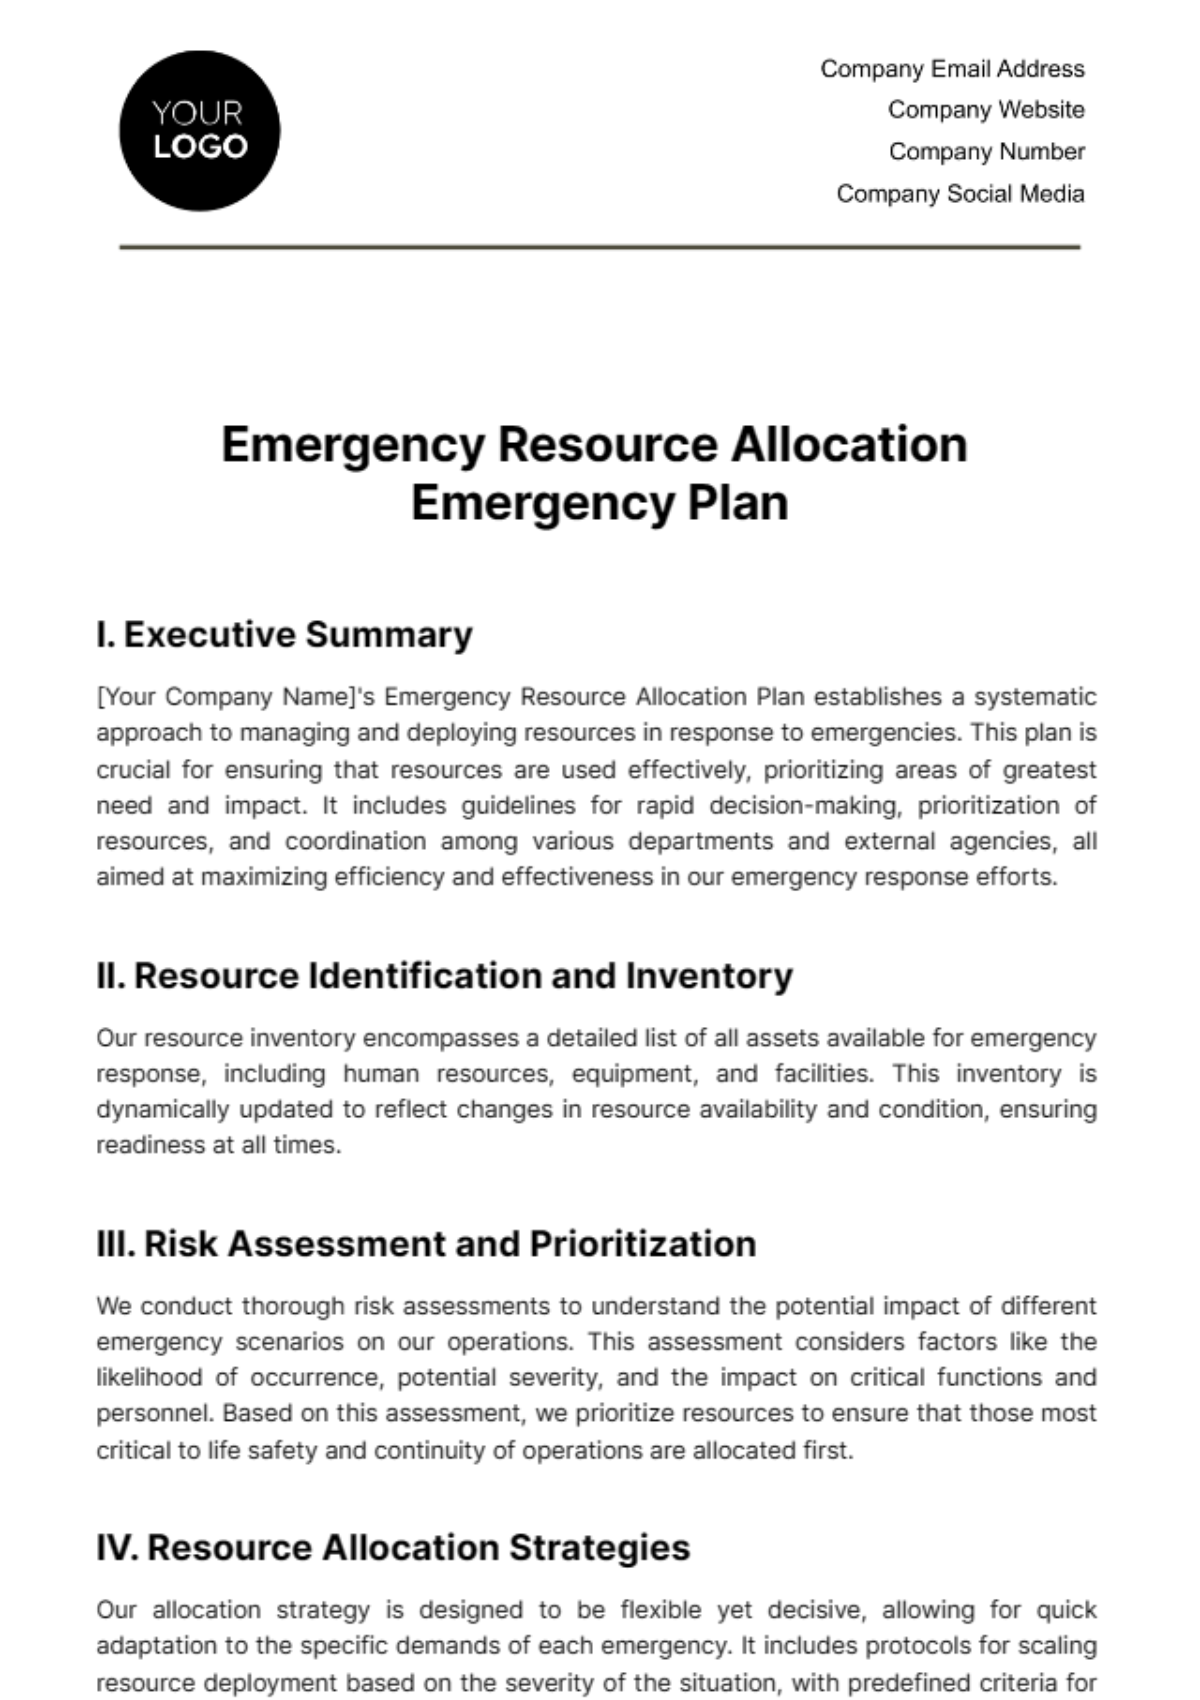 Emergency Resource Allocation Emergency Plan Template